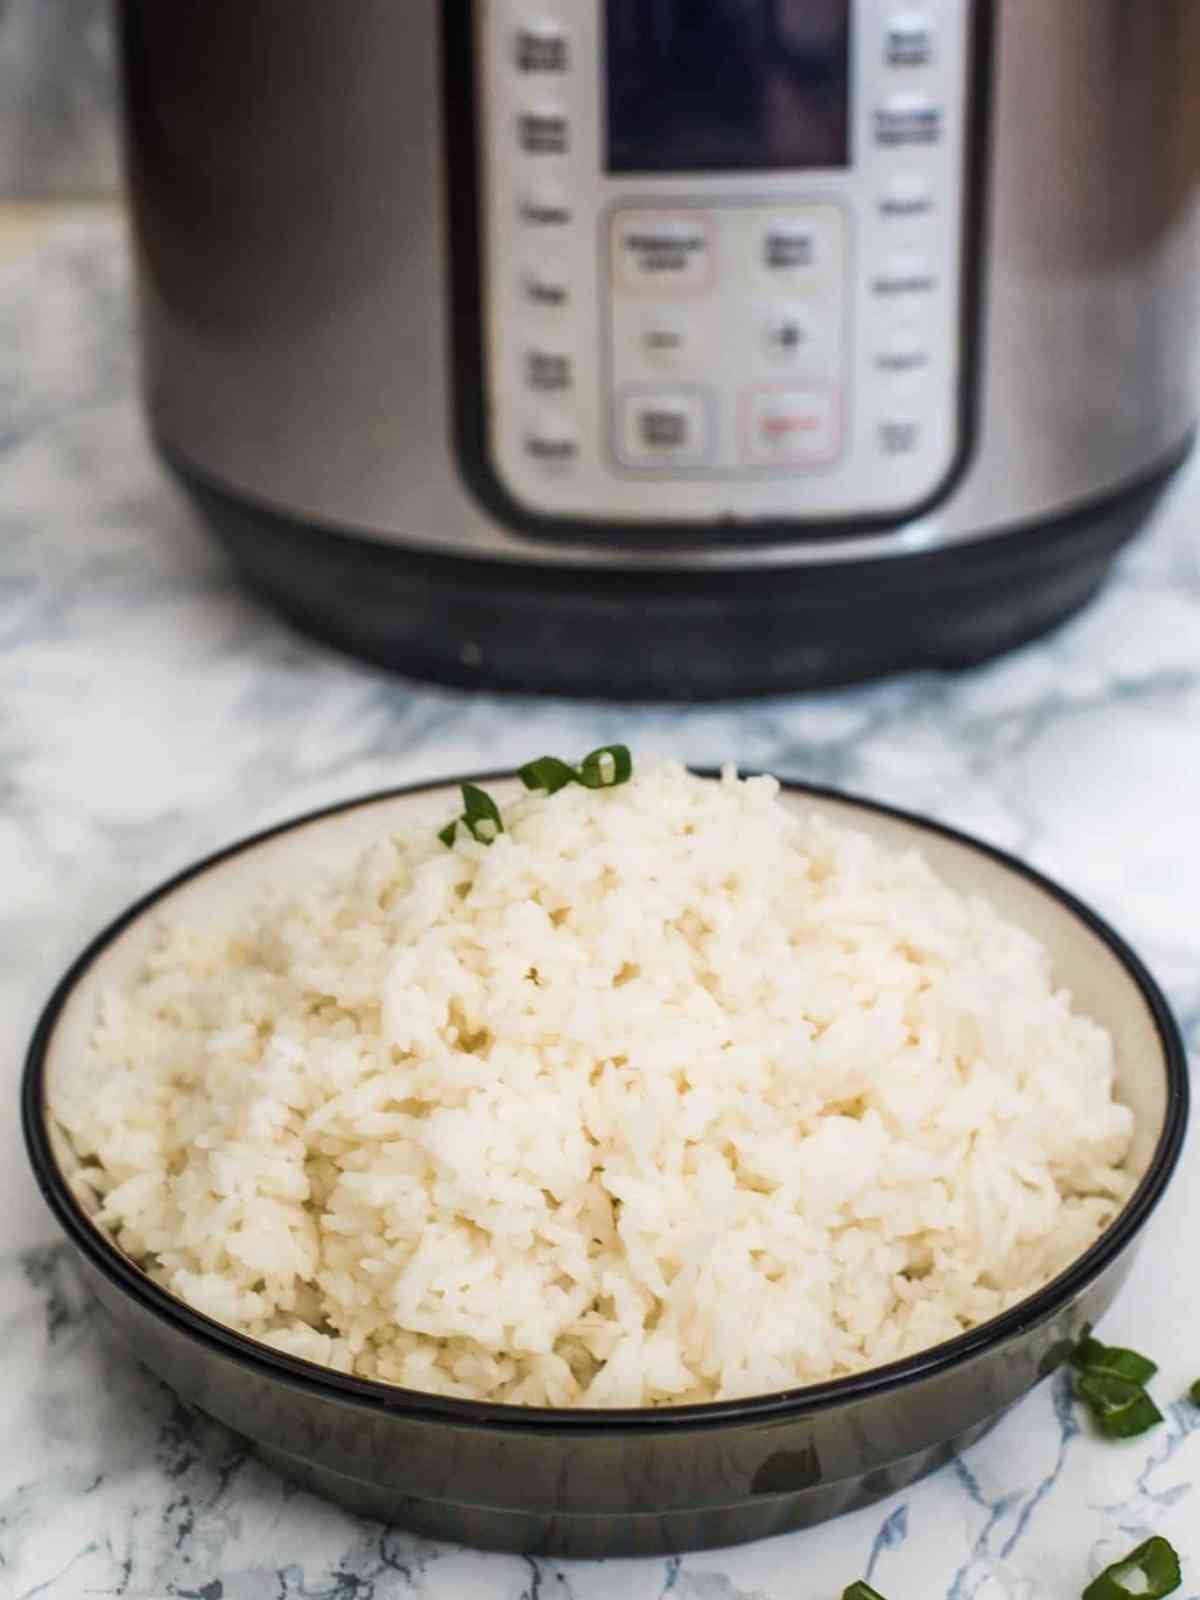 Cooked Jasmine rice on a plate near the Instant Pot